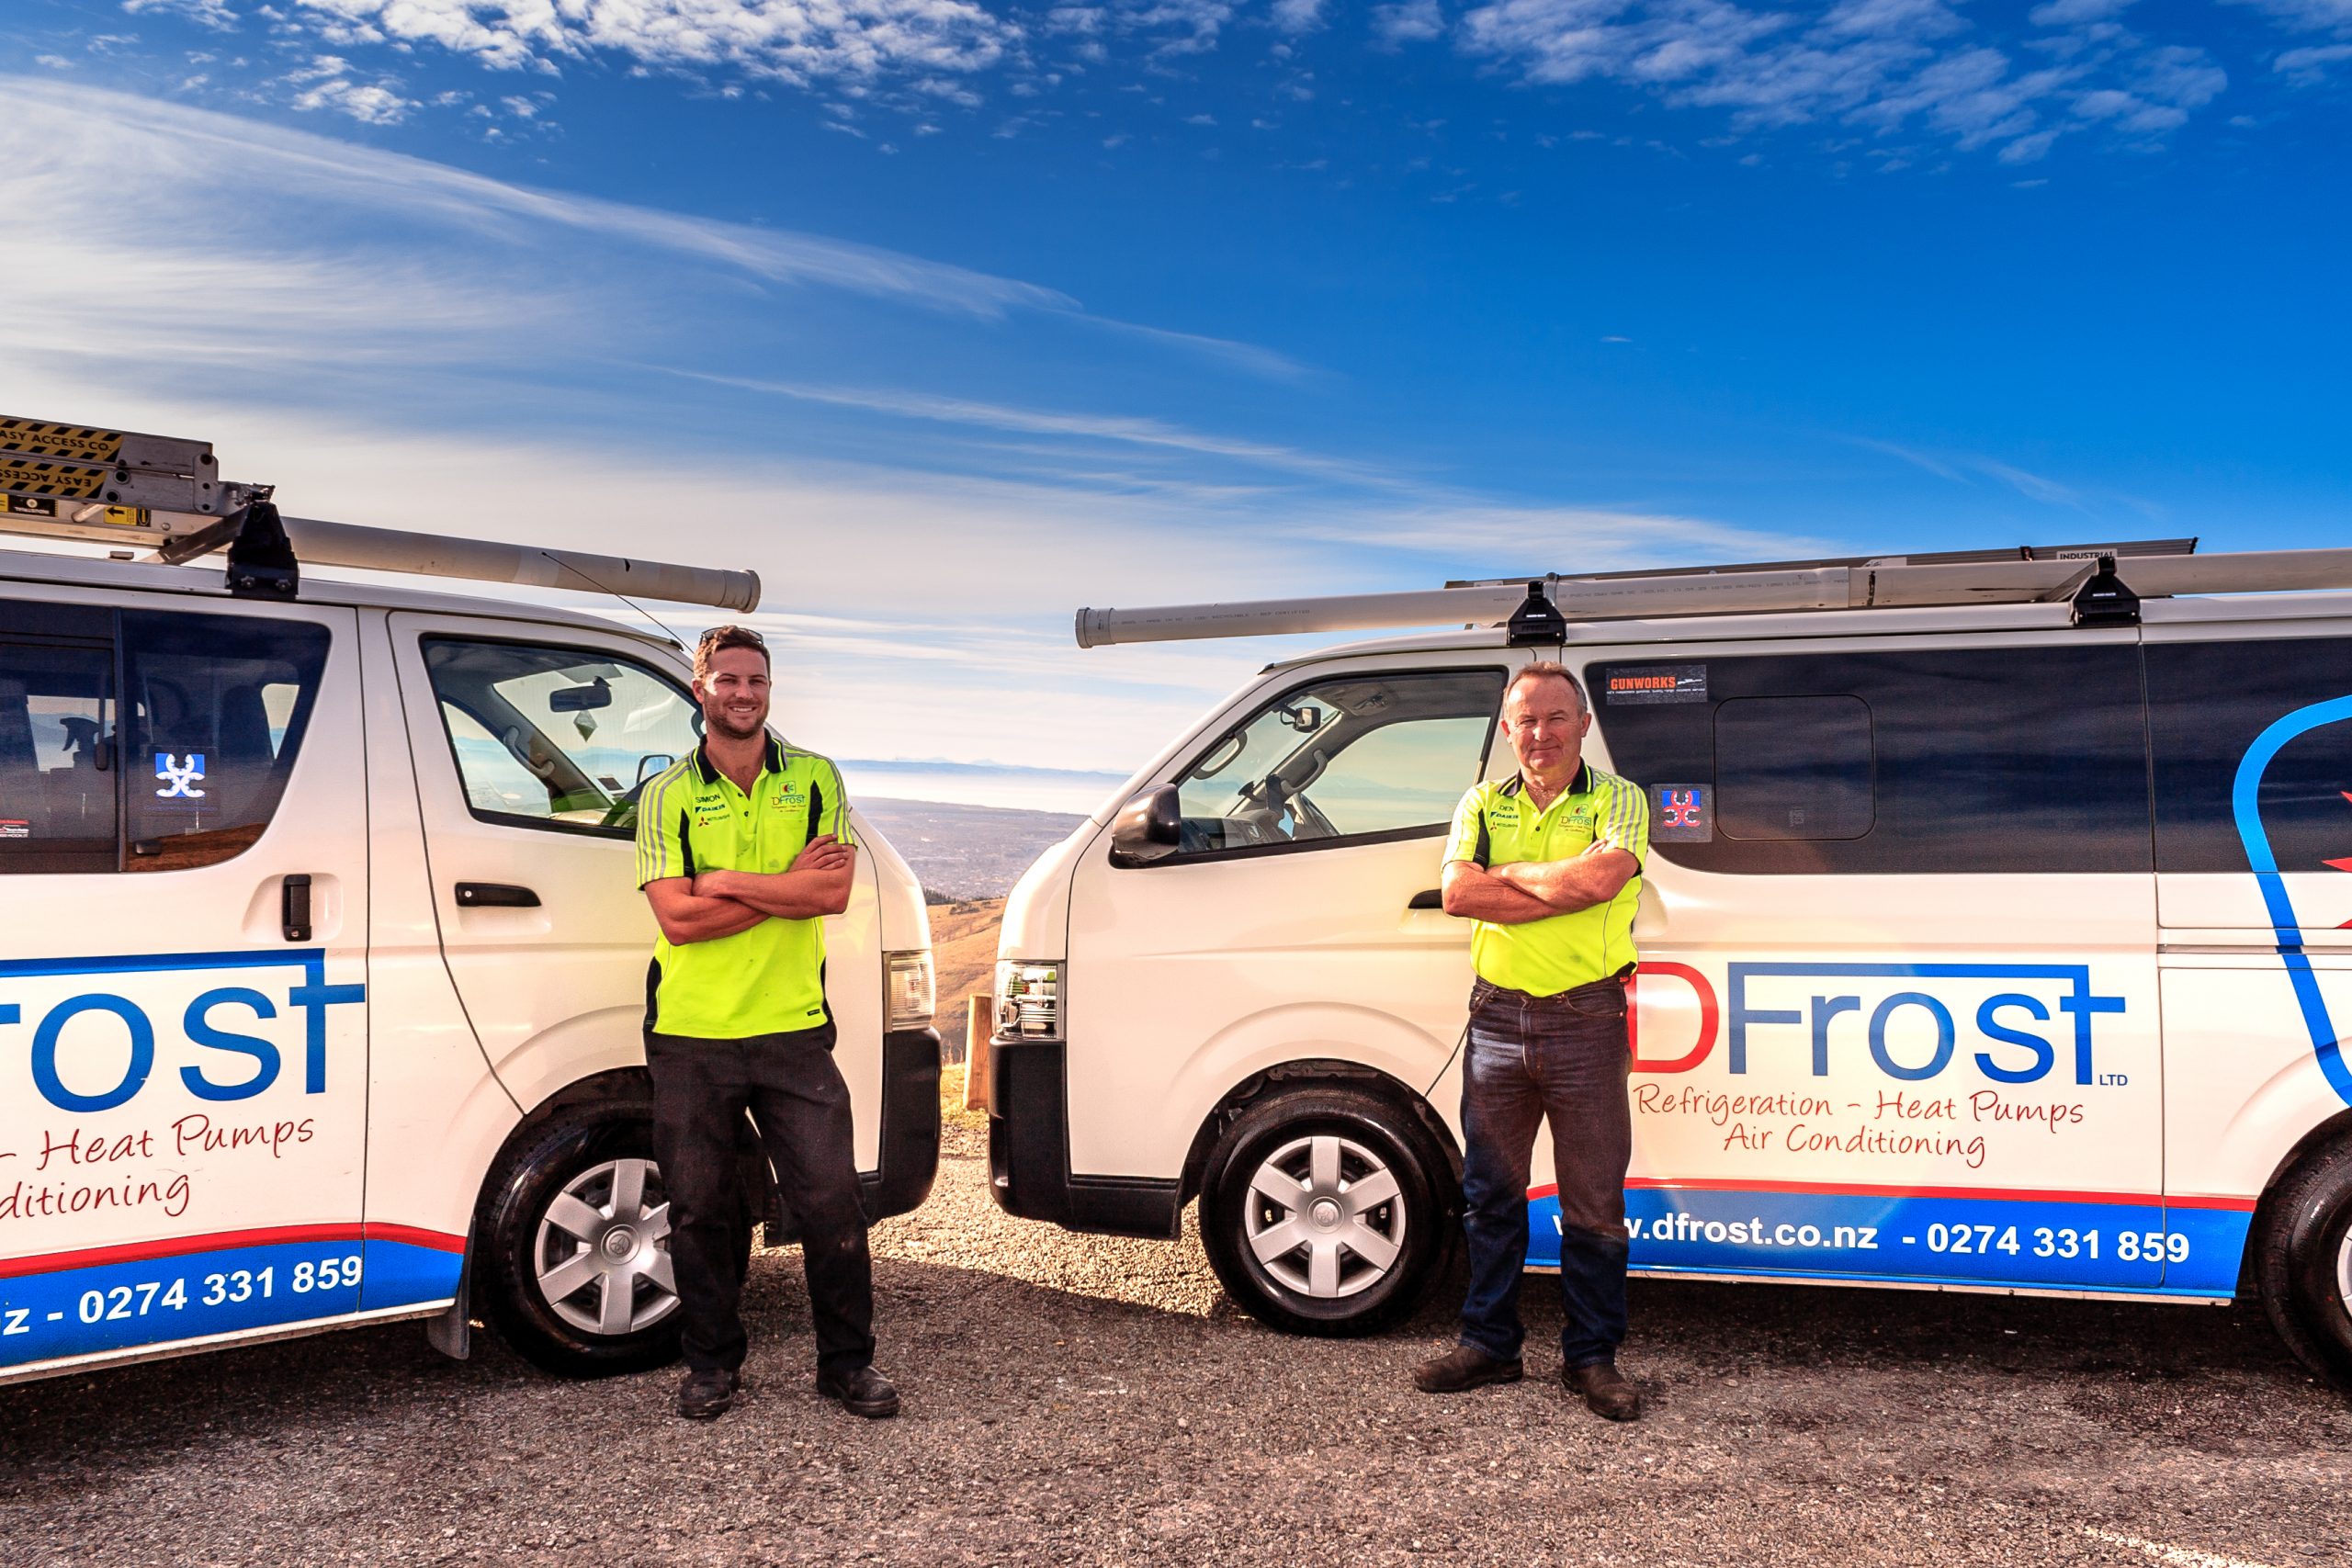 simon and dennis in front of dfrost work vans